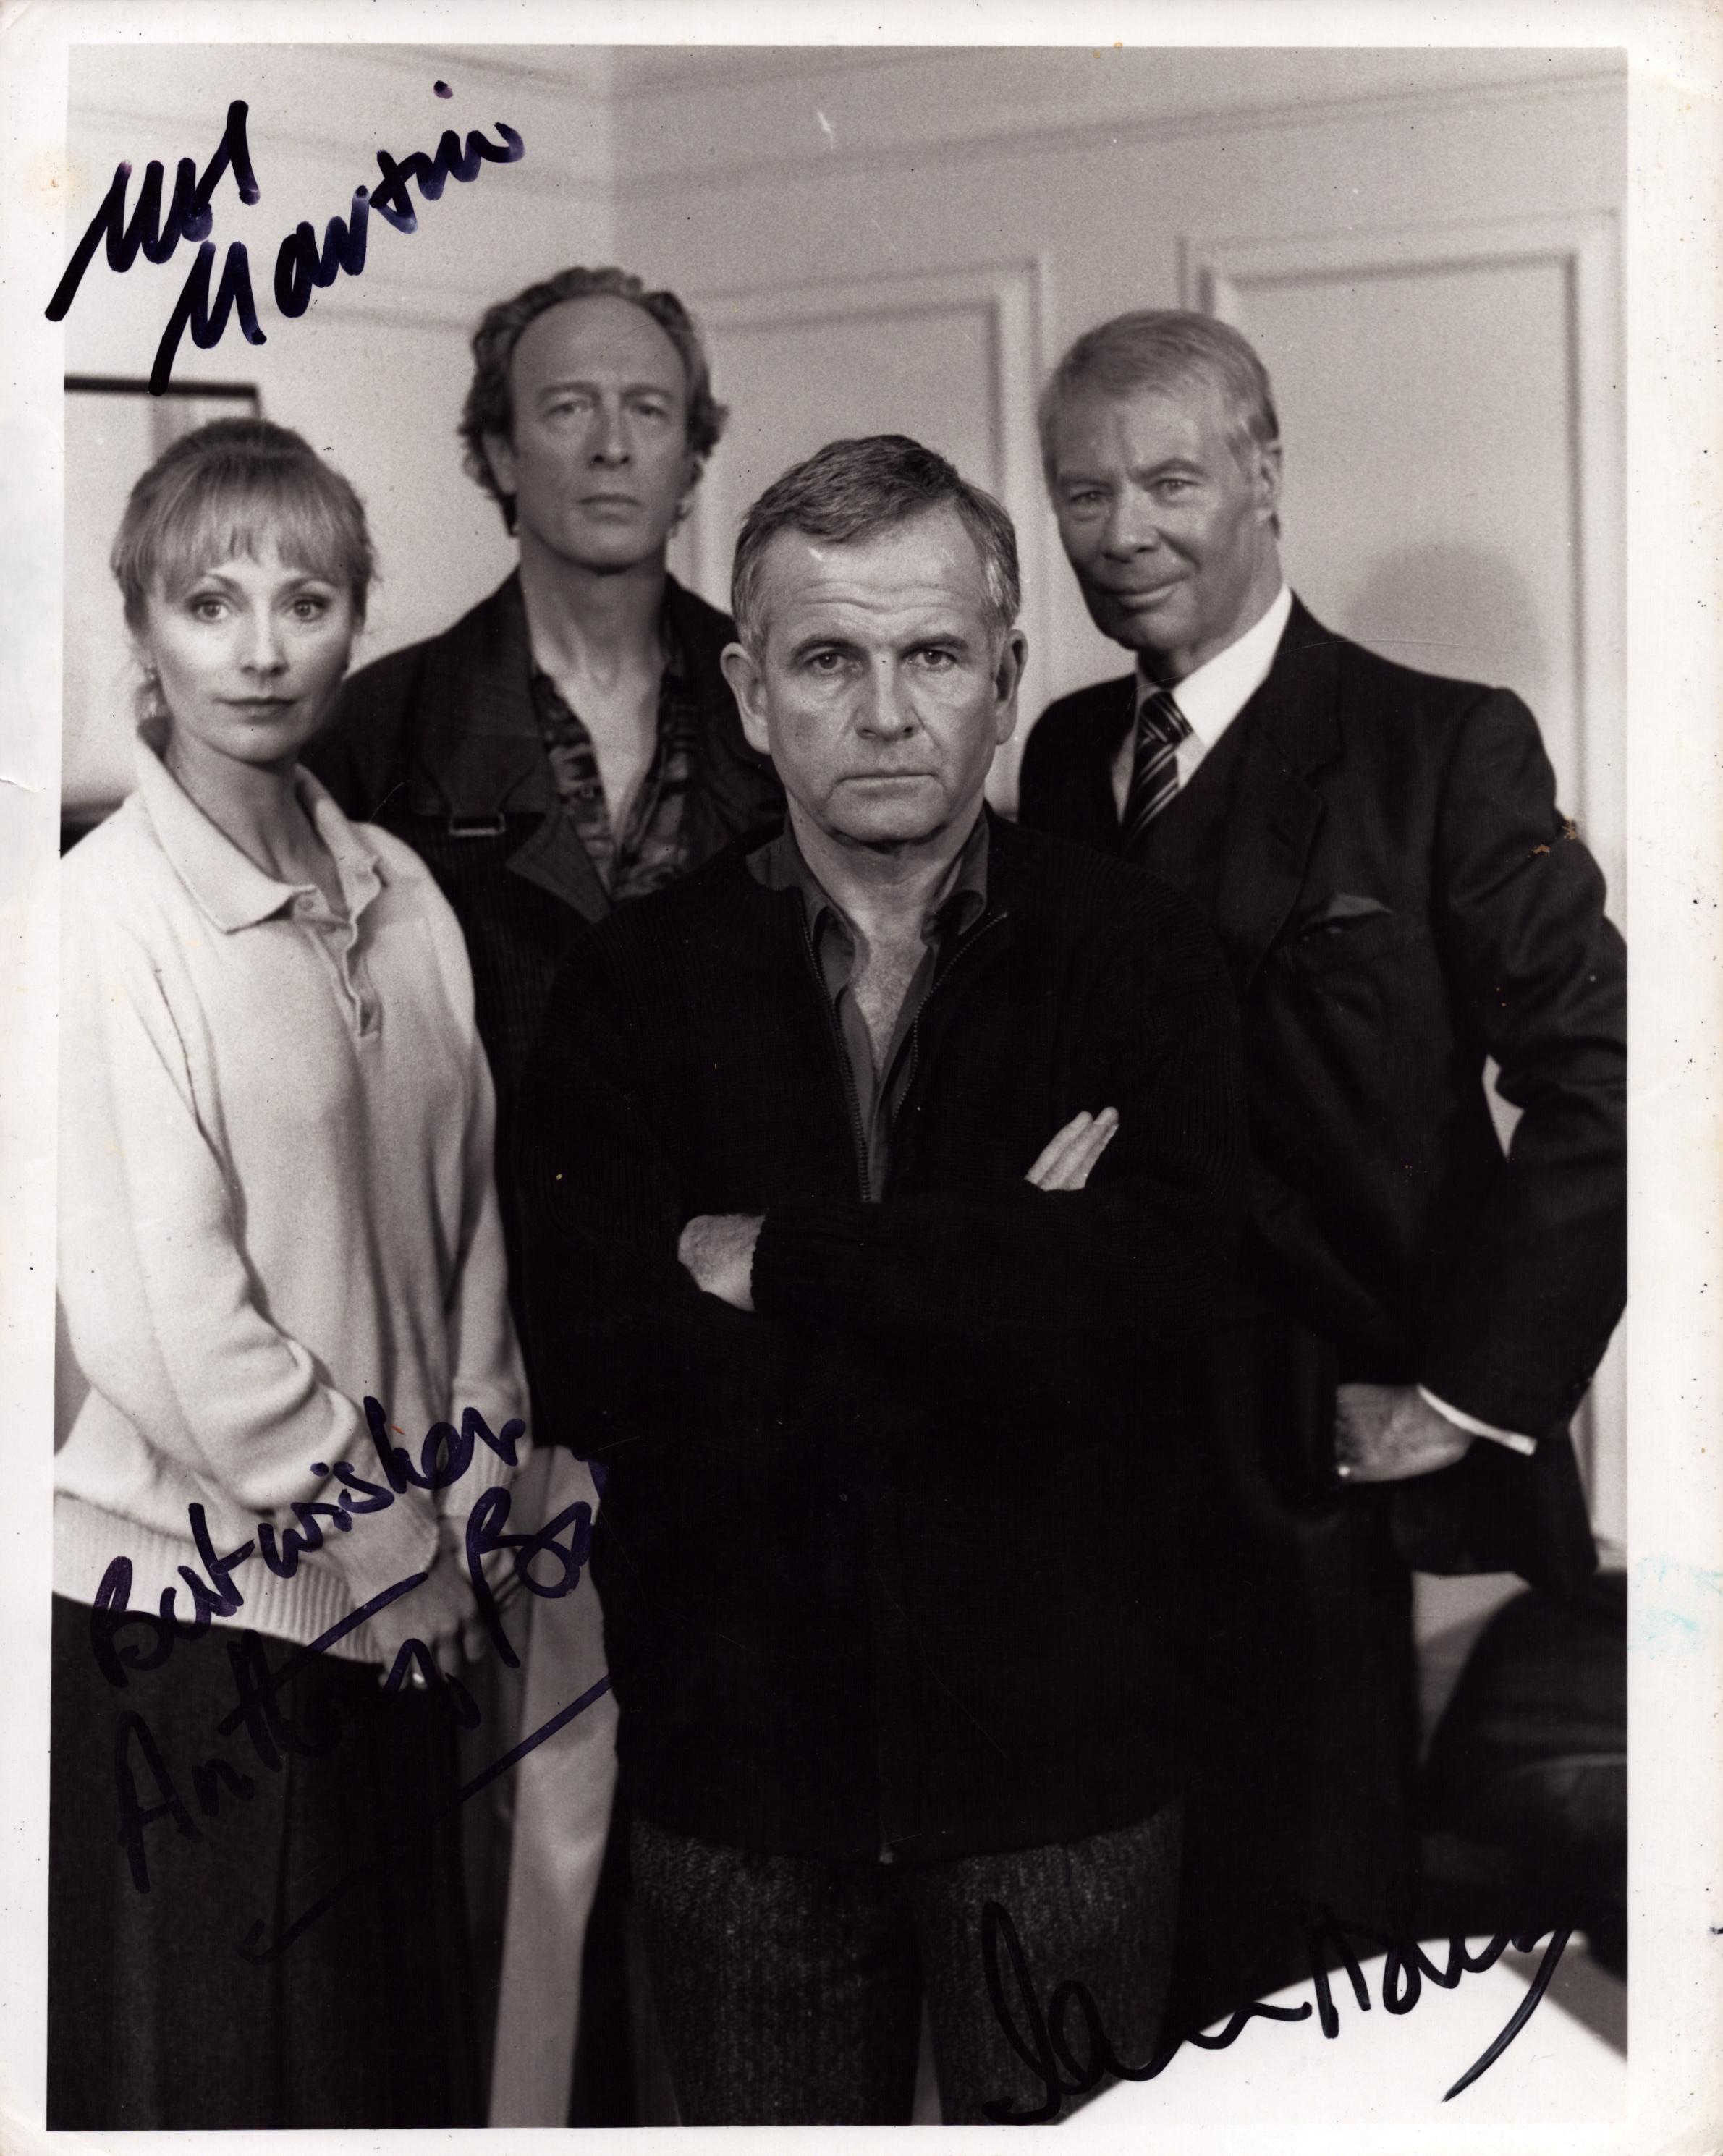 Mel Martin, Sir Ian Holm, Anthony Bate signed 10x8 inch black and white photo. Good Condition. All